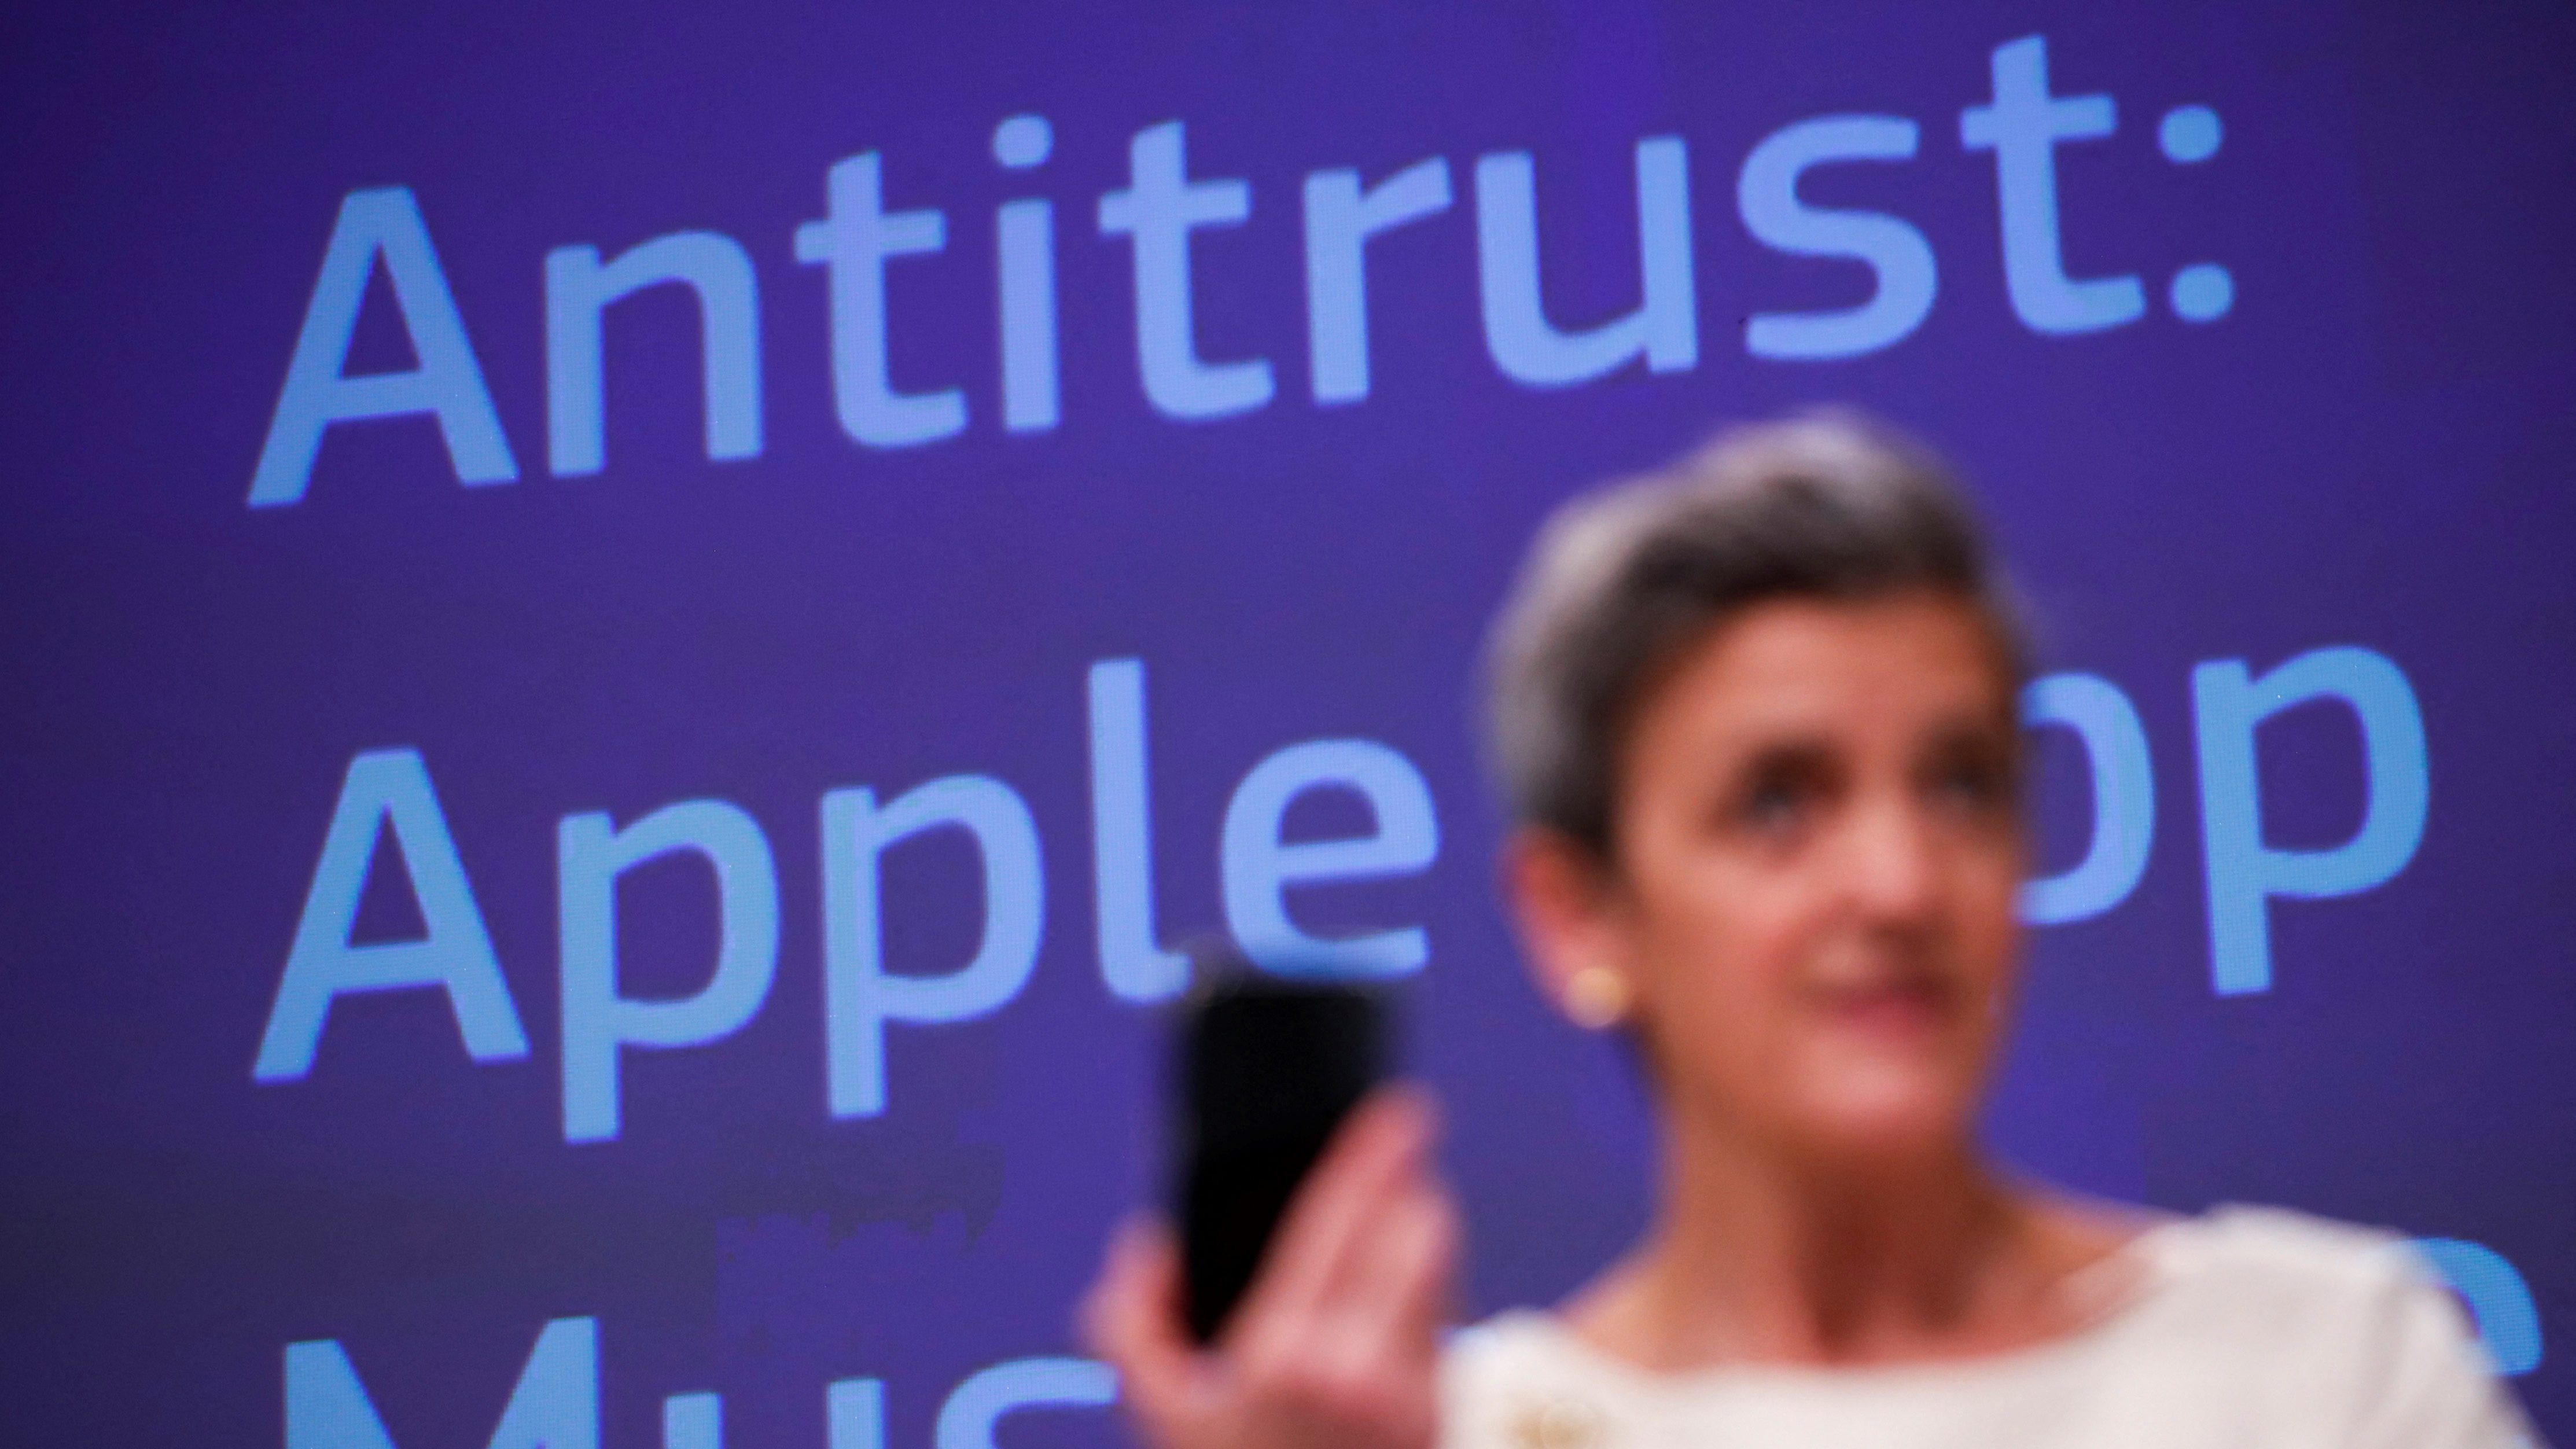 European Commissioner for Europe fit for the Digital Age Margrethe Vestager gestures as she speaks during an online news conference on Apple antitrust case at the EU headquarters in Brussels on April 30 2021